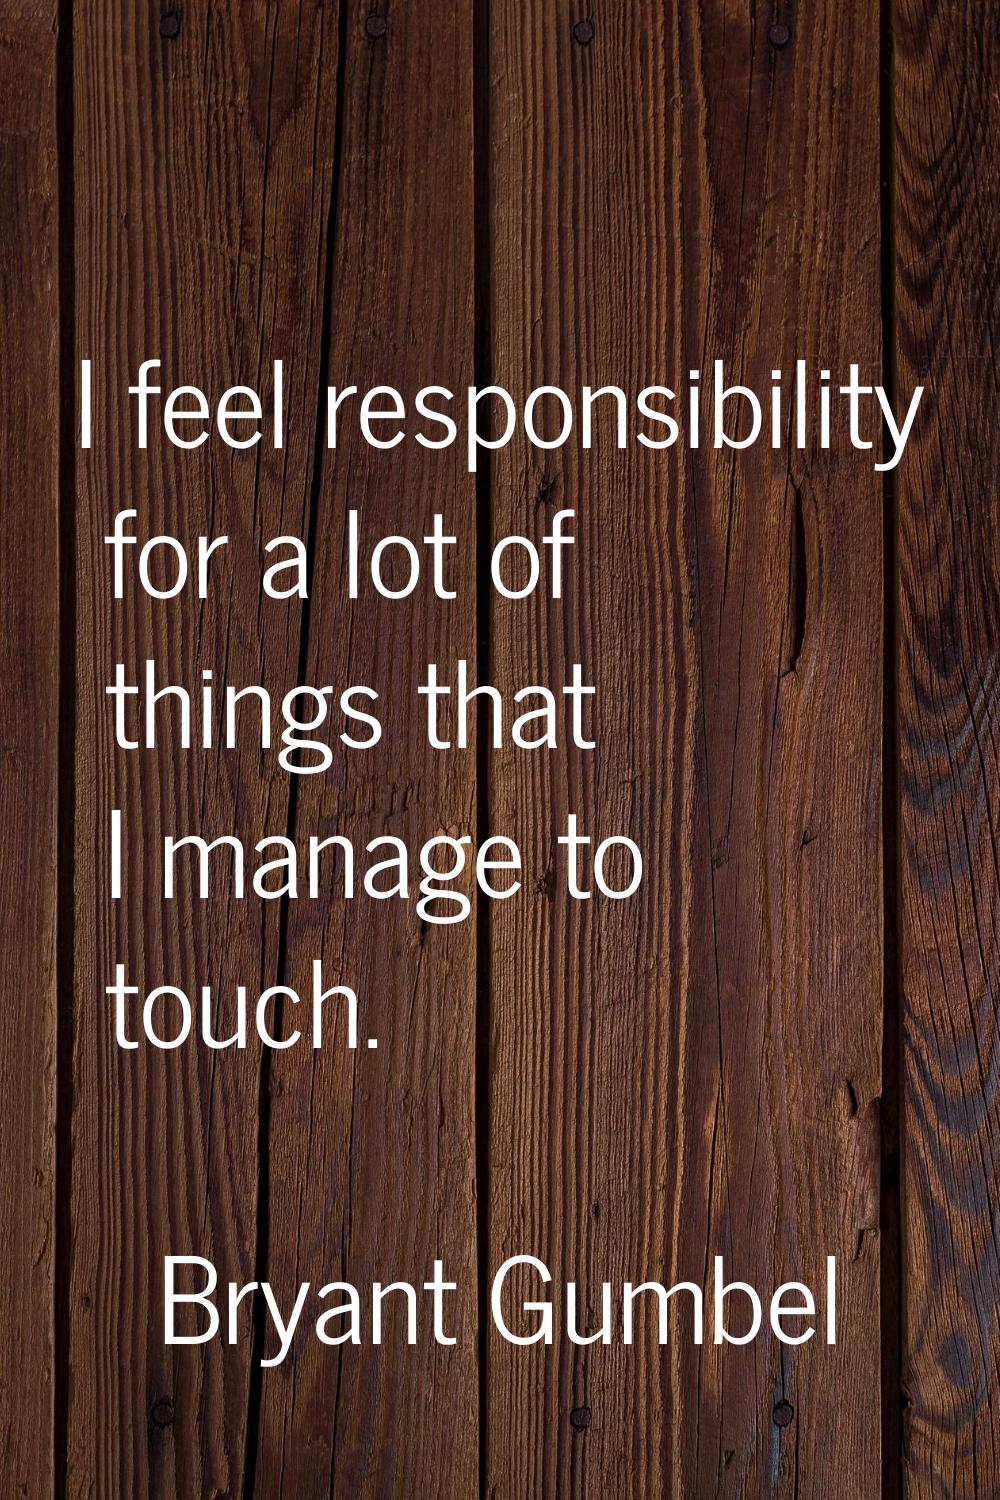 I feel responsibility for a lot of things that I manage to touch.